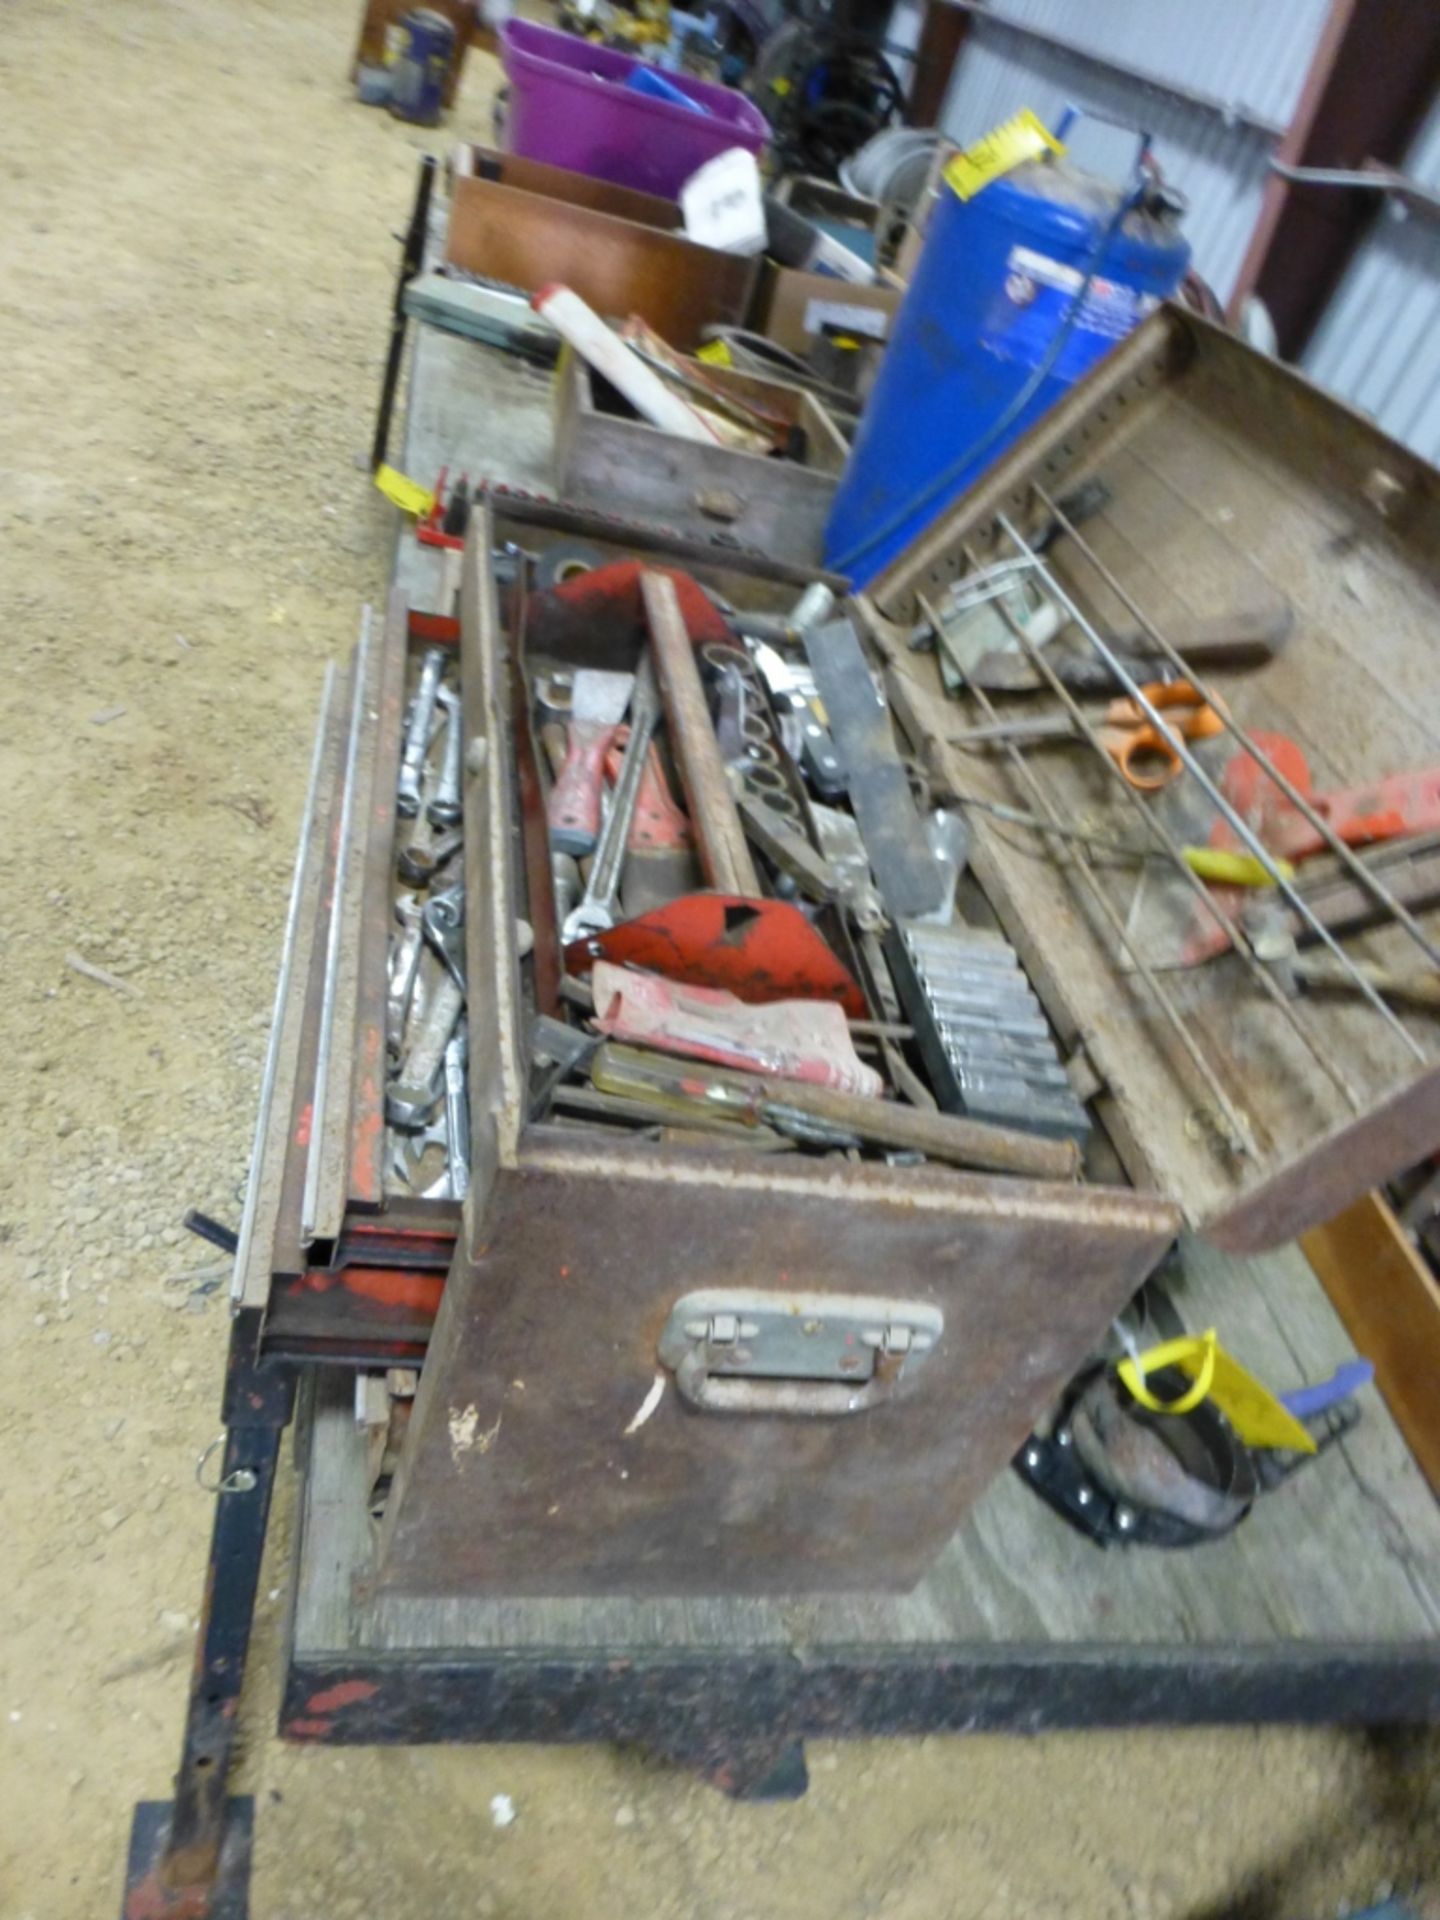 Tool box, w/ tools and contents